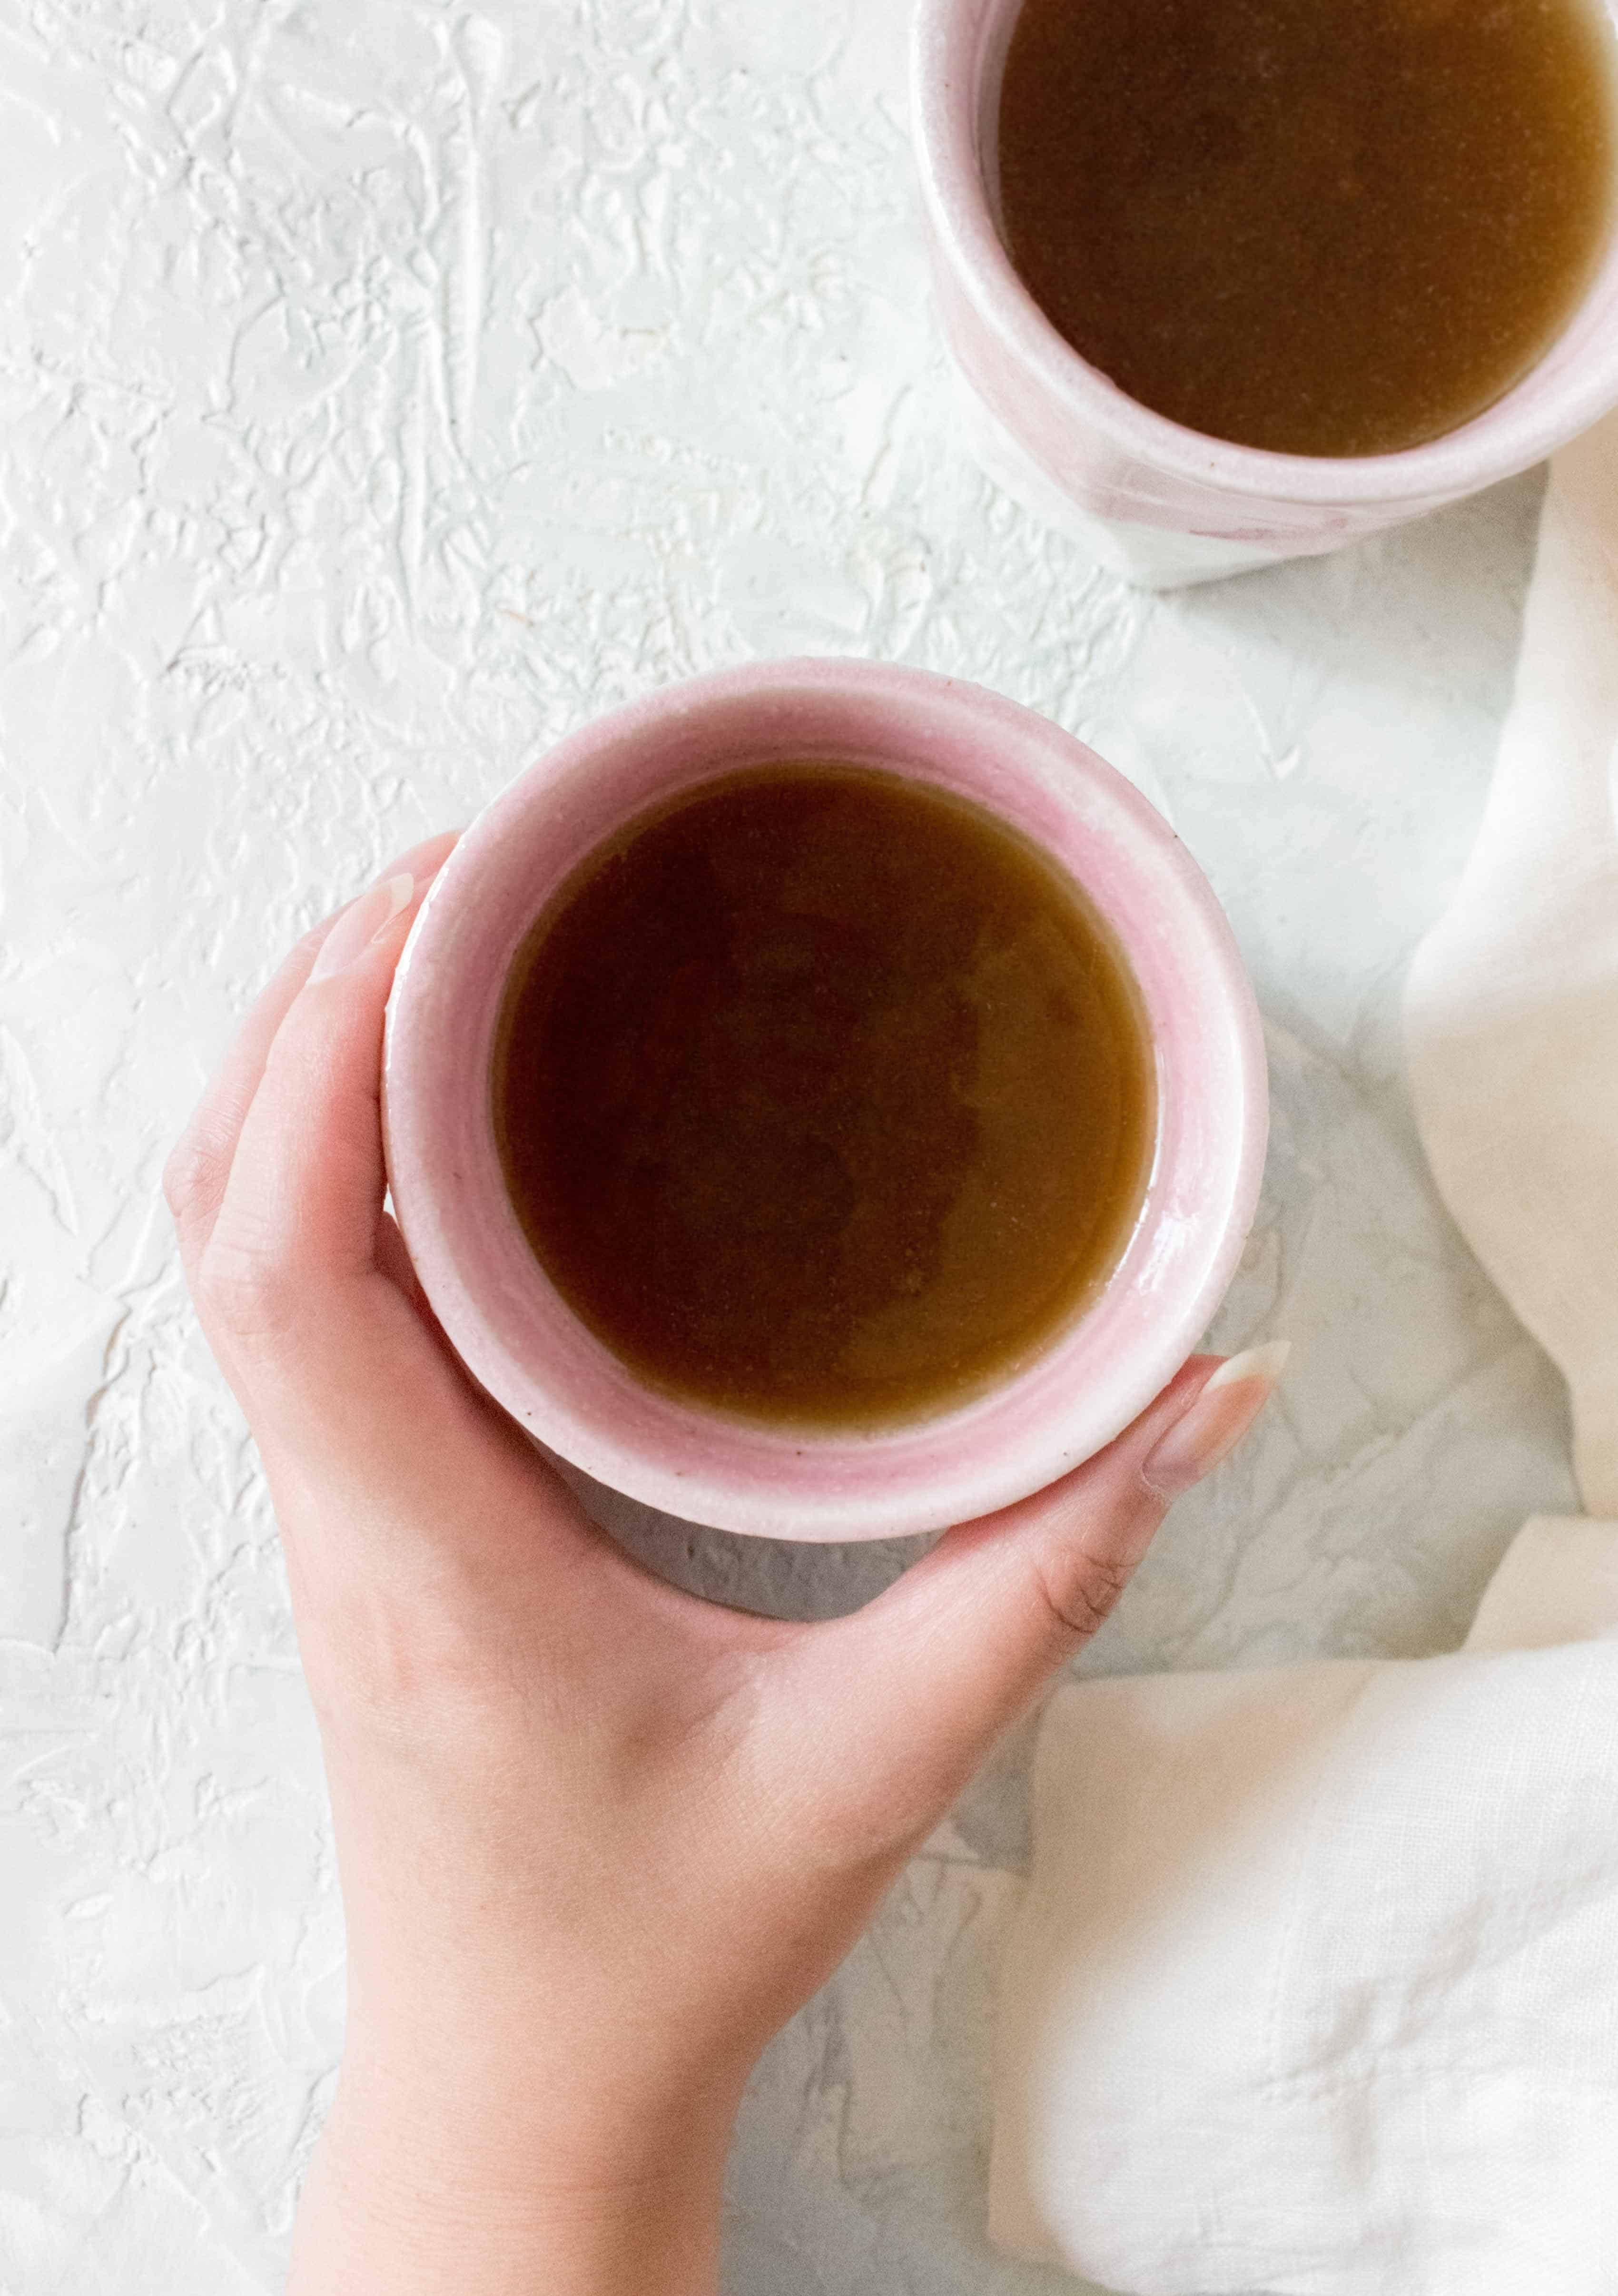 Bone broth is everywhere these days. Skip the line and the costs by making a batch at home with this post teaching you how to make Instant Pot Bone Broth at home!